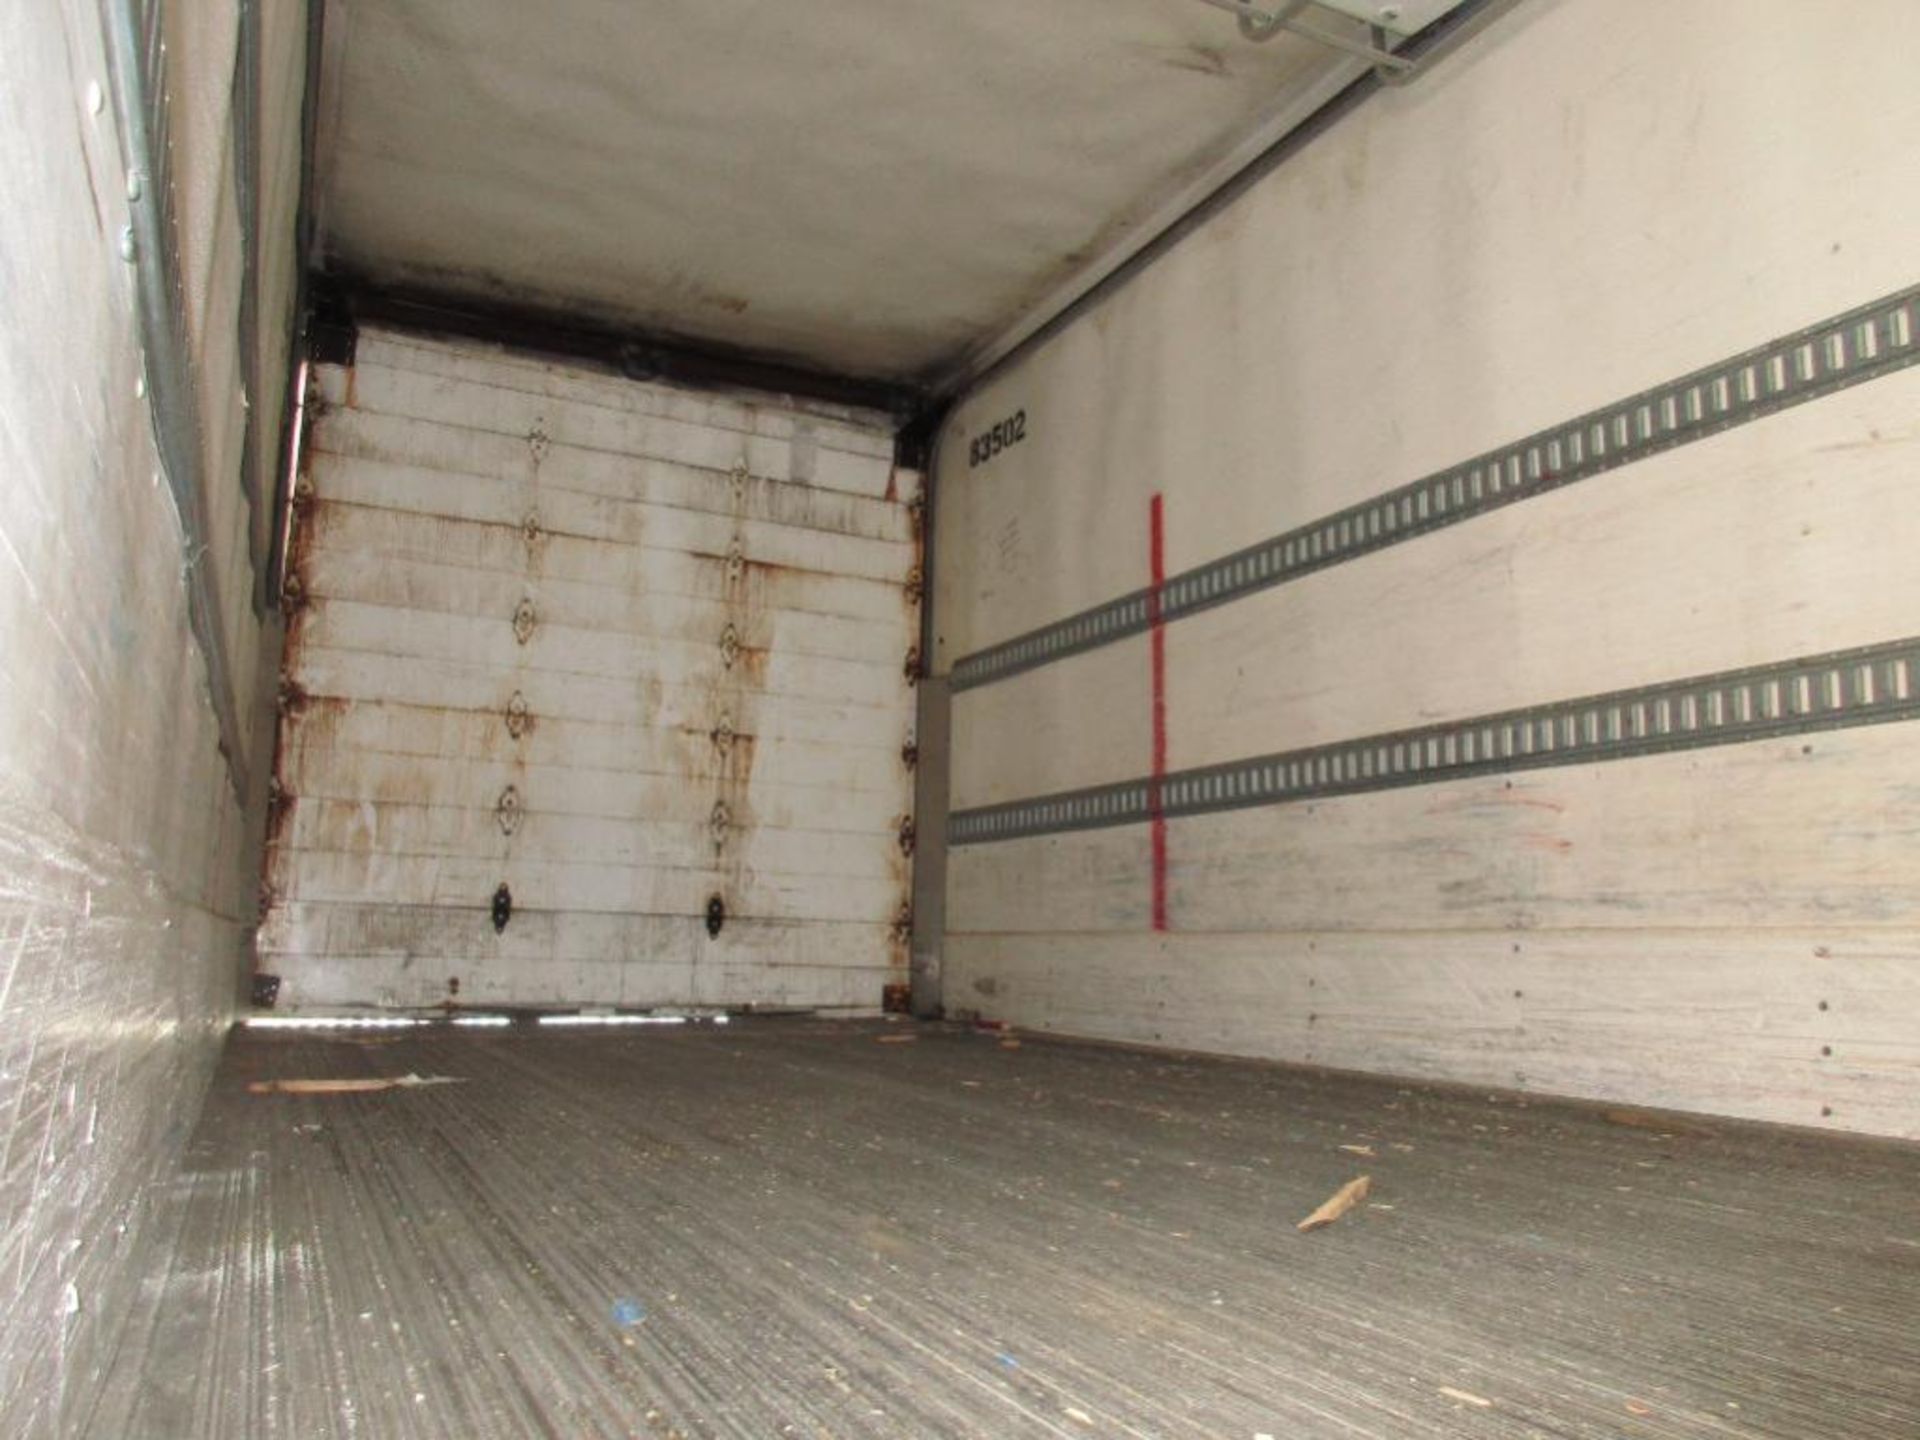 2004 Great Dane 35' Refrigerated Trailer, VIN # 1GRAA70275B703706, Unit 83502 - Image 19 of 28